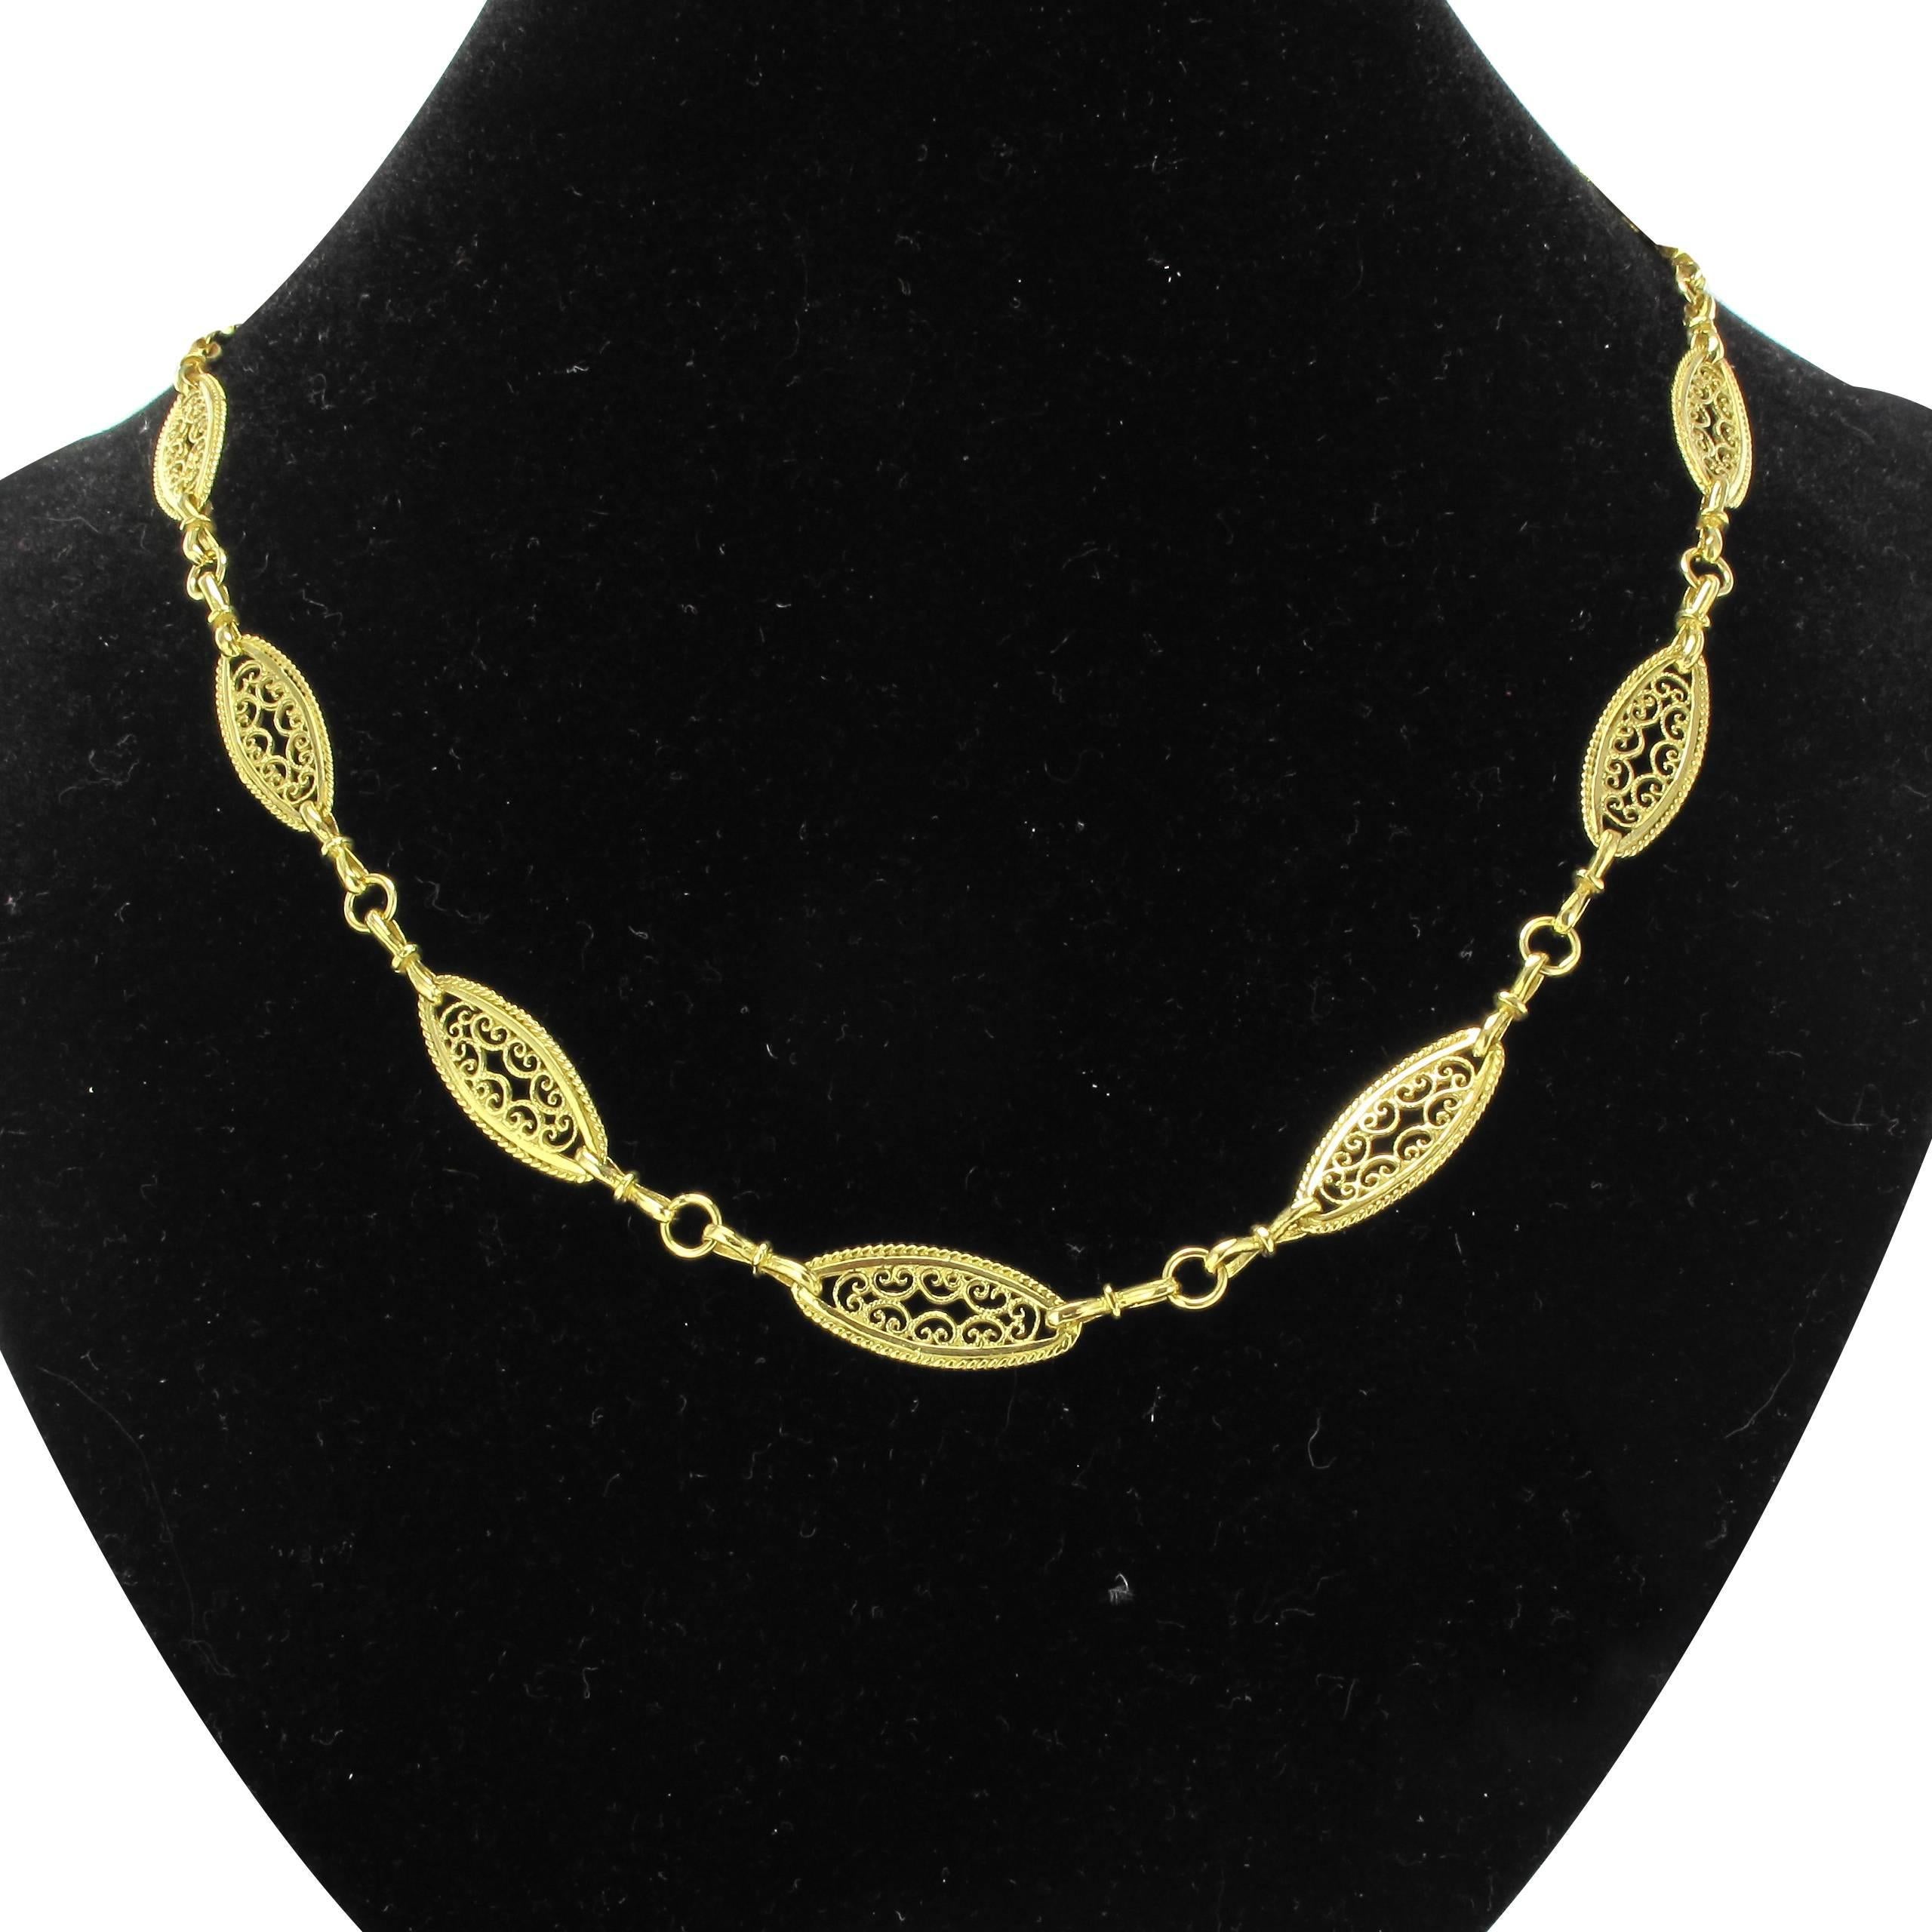 18 carat yellow gold necklace, eagle head hallmark.

This gorgeous antique necklace is composed of openwork shuttle shaped links of a filigree design separated by belcher chain. The clasp is a spring ring. 

Overall length: 59,7 cm, width at the